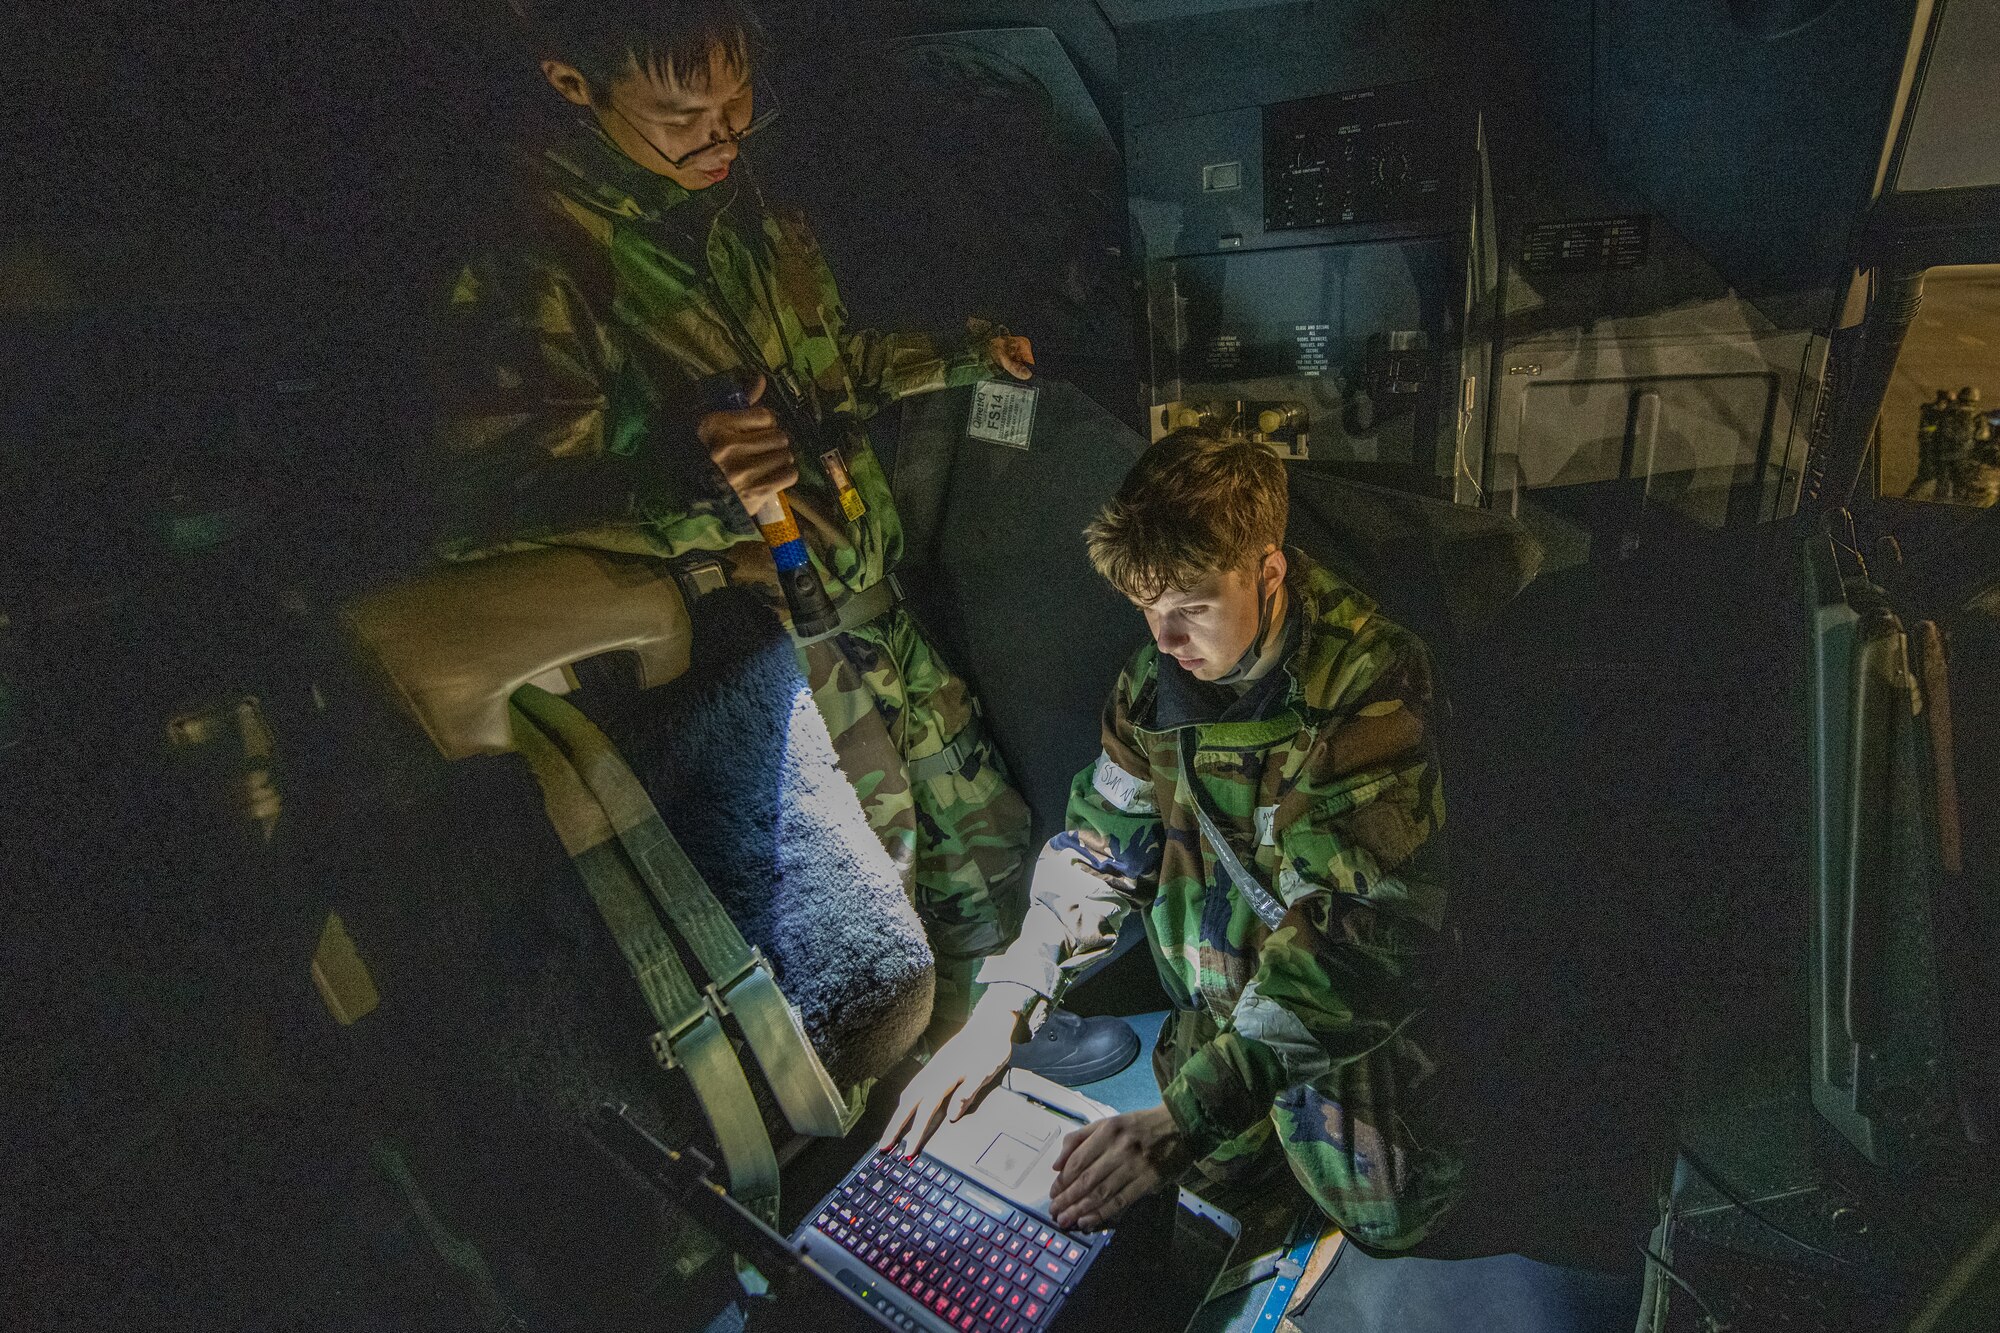 teo airmen in protective suits work on a plane in the dark